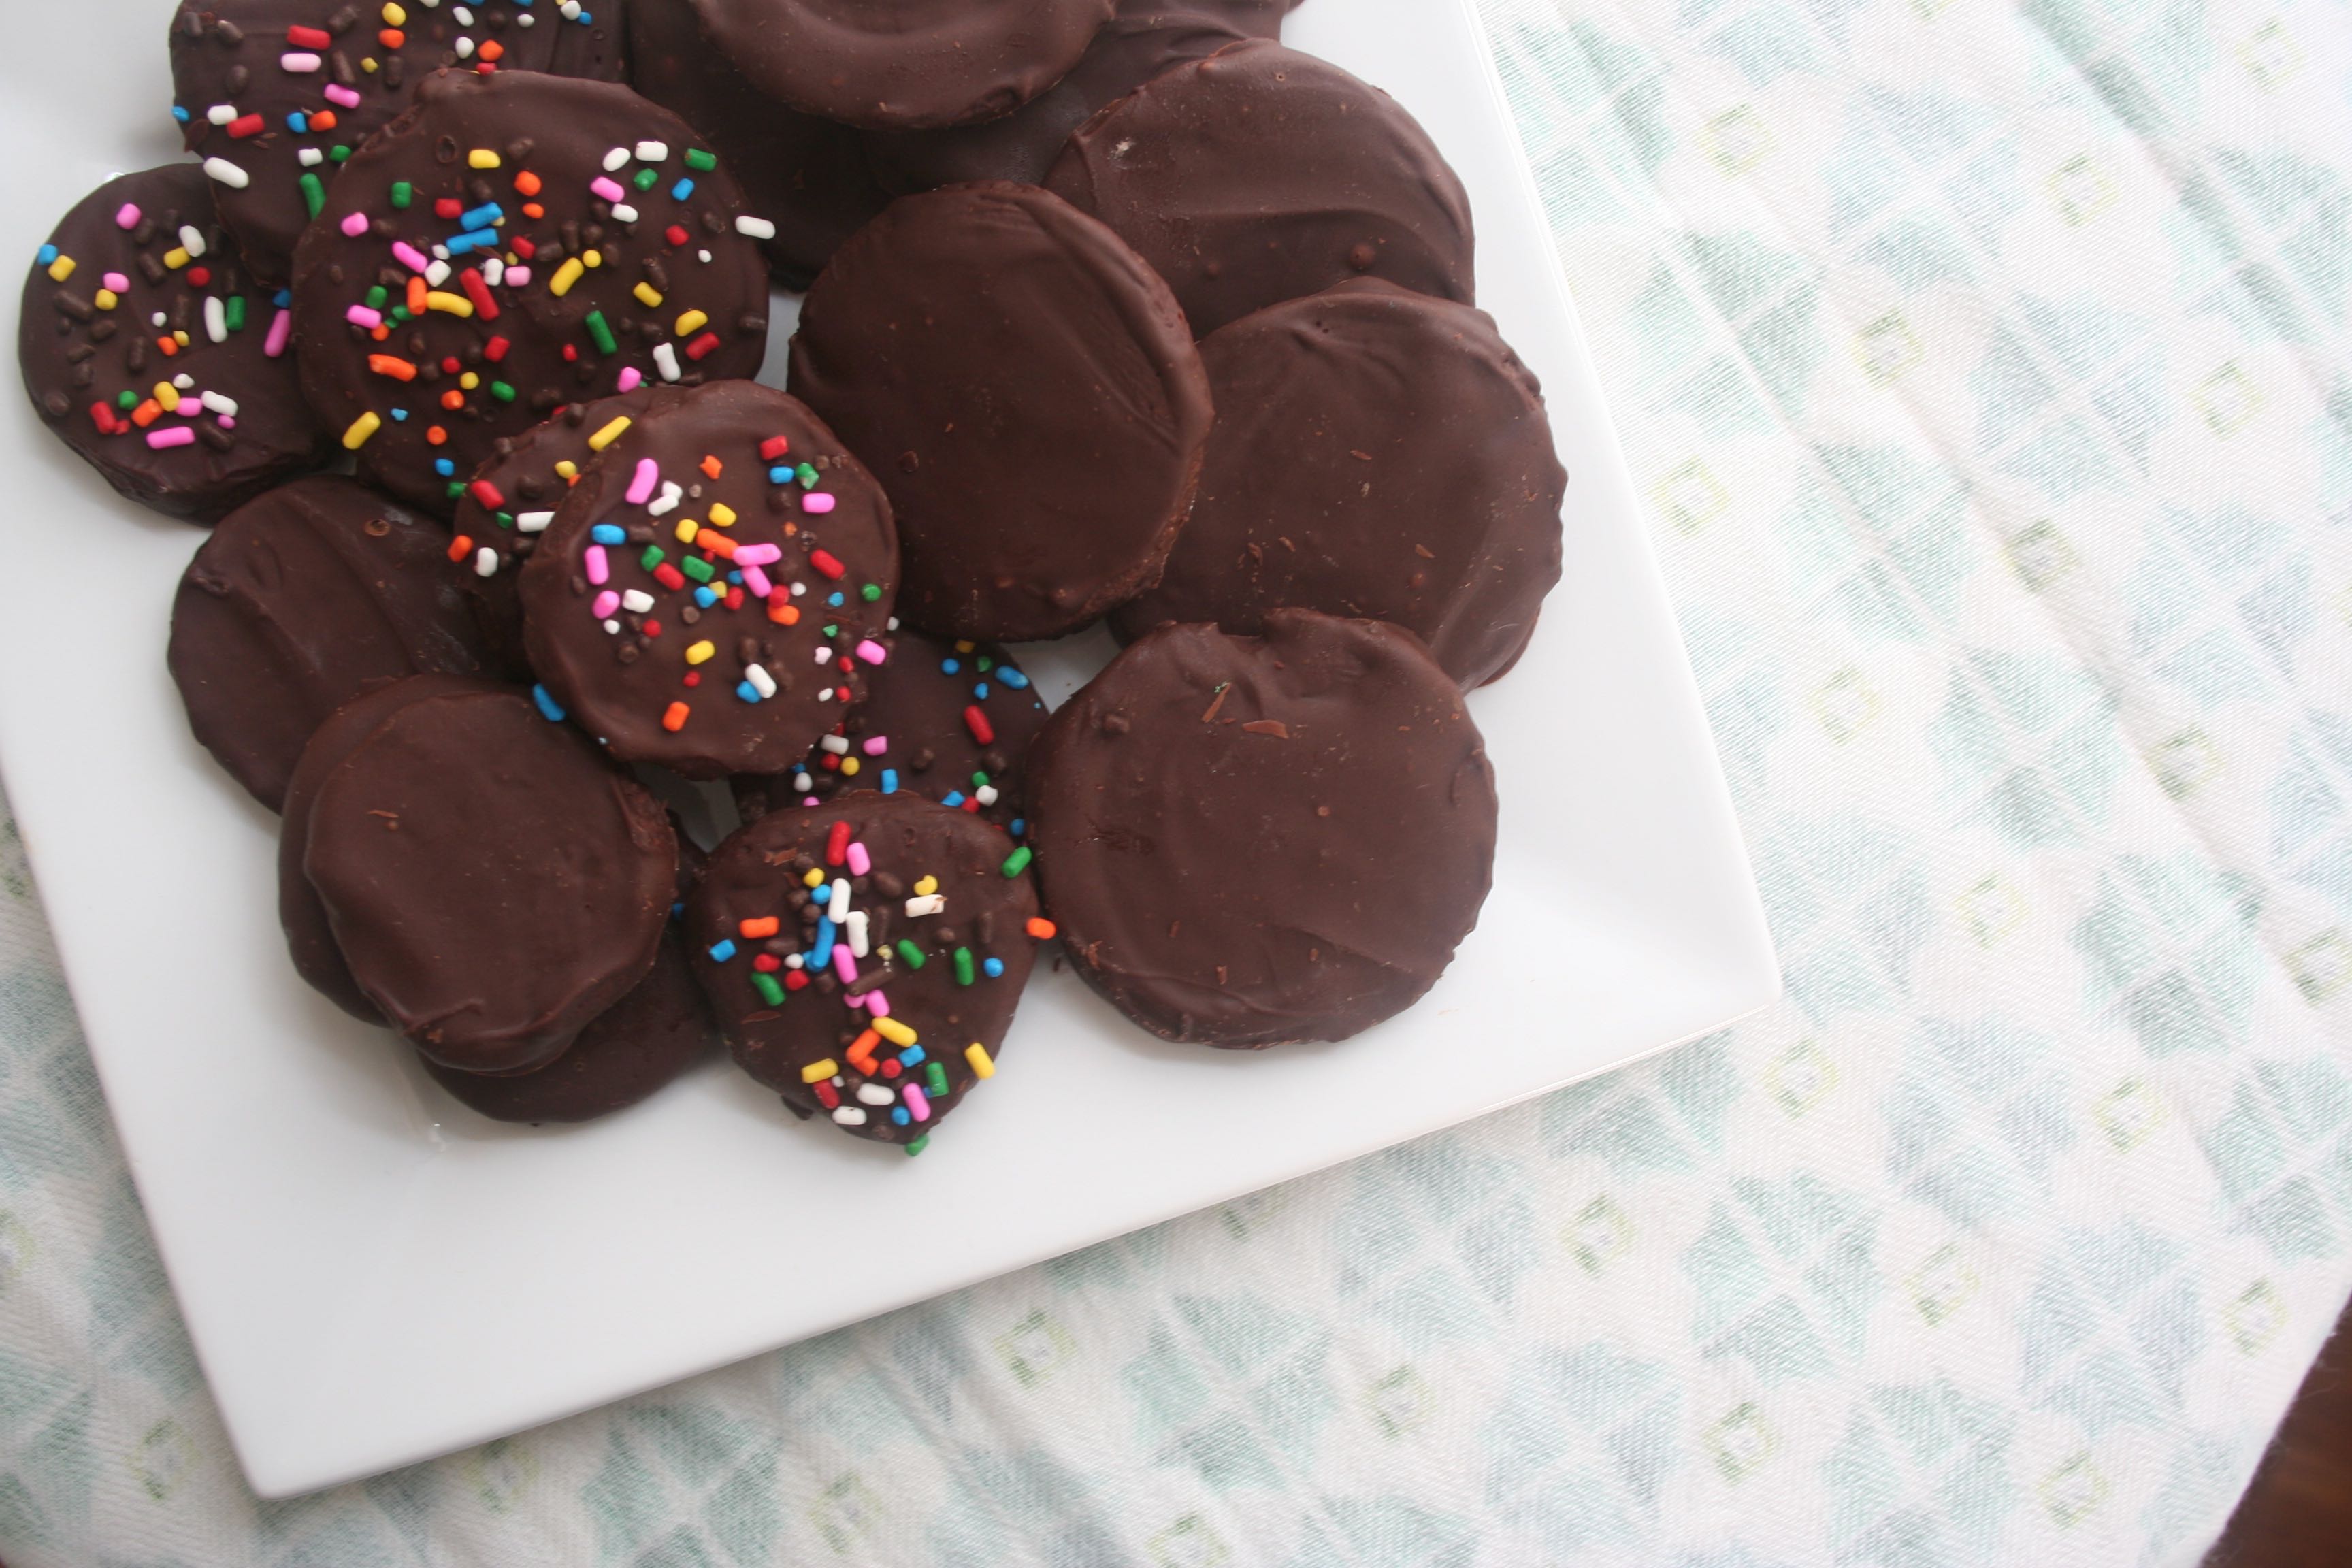 chocolate mint cookies (homemade thin mints)